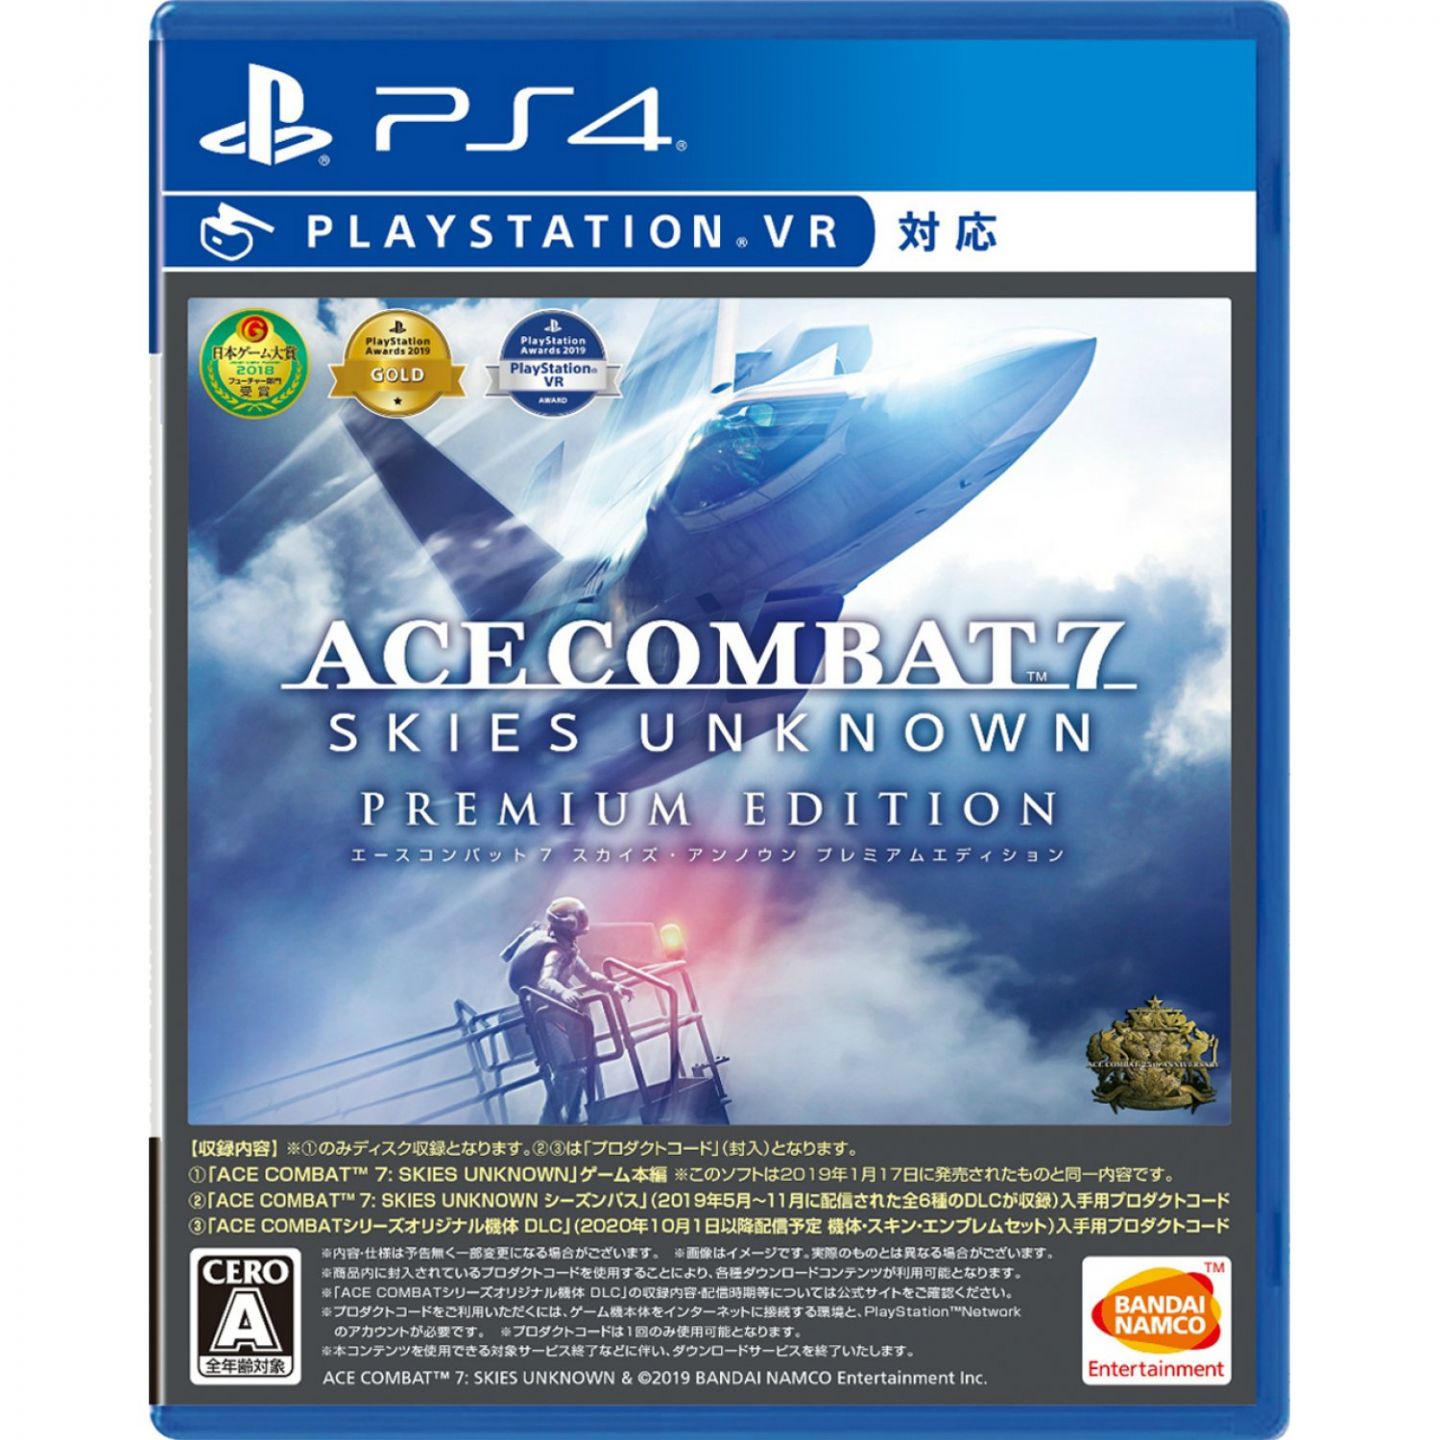 pin lette Glow Bandai Namco Games Ace Combat 7 Skies Unknown Premium Playstation 4 PS4  Edition